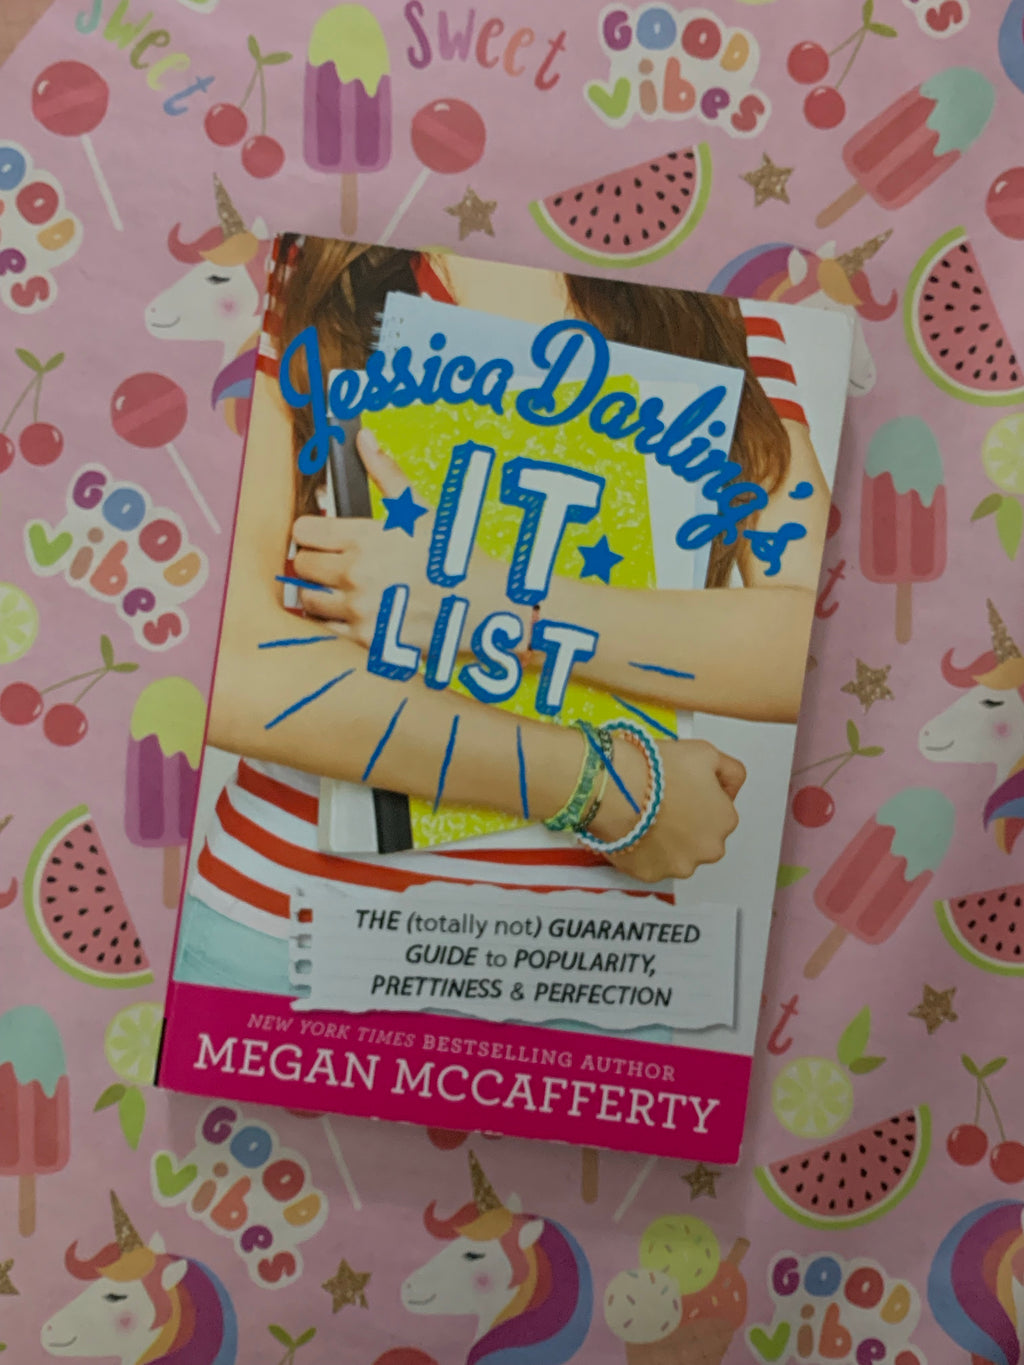 Jessica Darling's It List: The (totally not) Guaranteed Guide to Popularity, Prettiness & Perfection- By Megan McCafferty